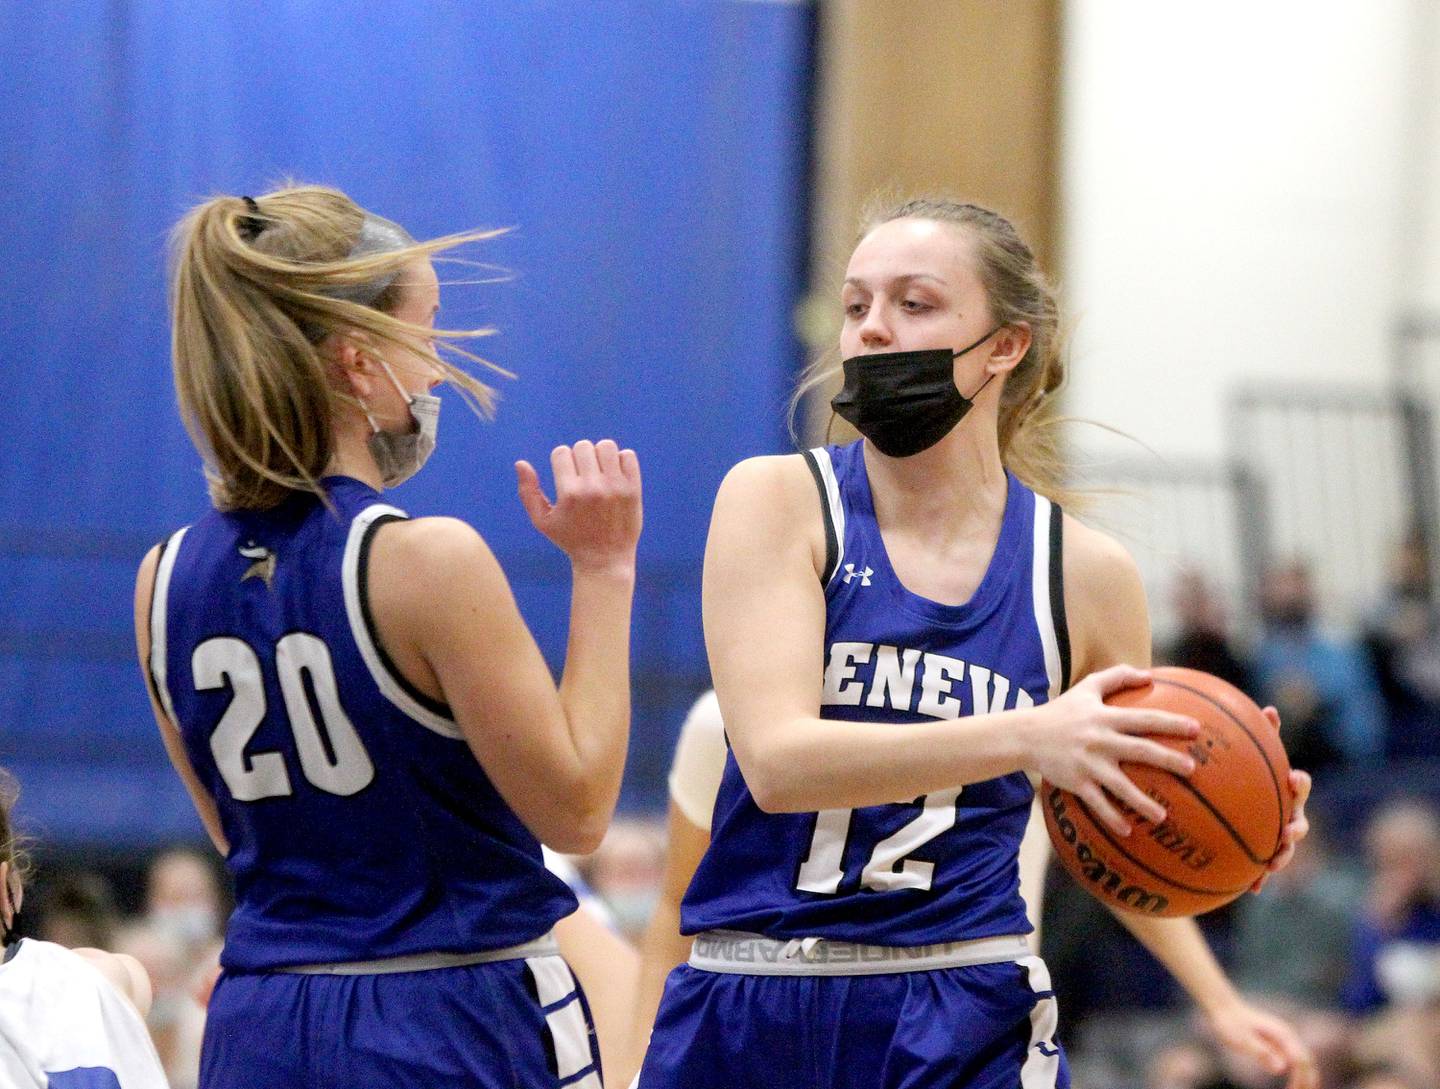 Geneva's Zosia Wrobel (12) looks to pass the ball during a game at Wheaton North on Saturday, Jan. 8, 2022.